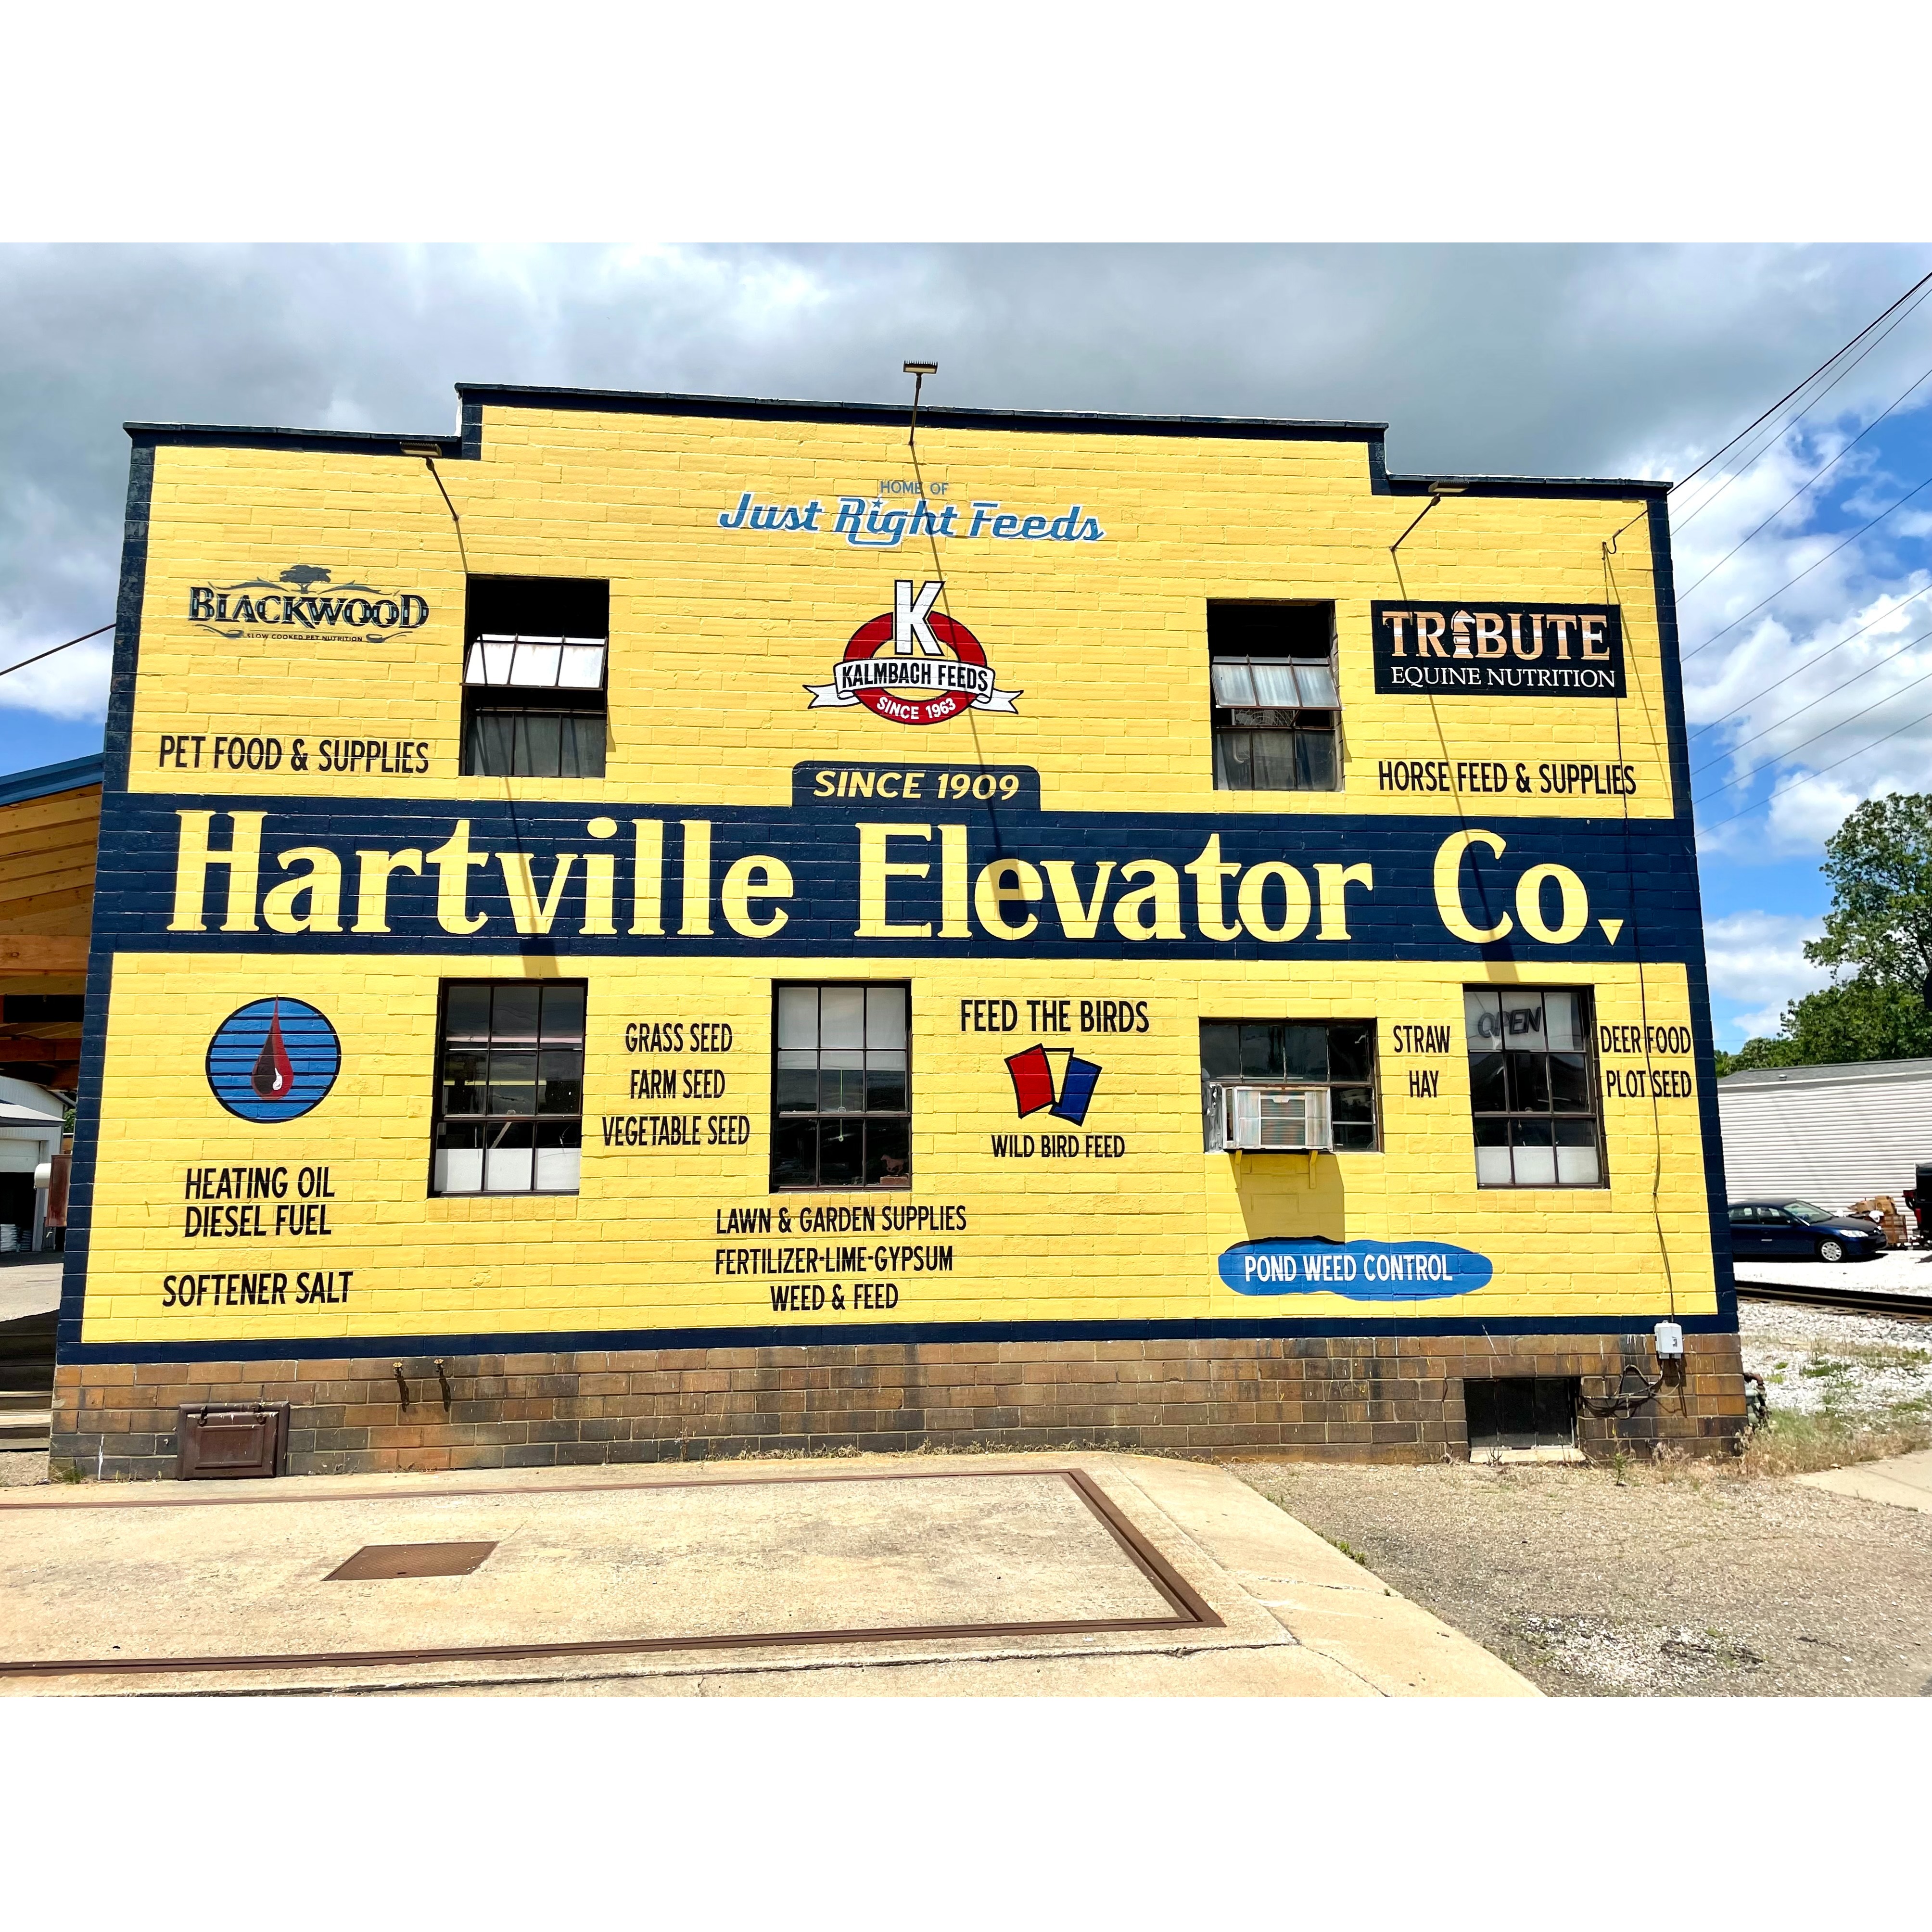 At Hartville Elevator Co. we wear many hats: lawn and garden supply store, livestock feeds manufacturer, pet supply store, and petroleum products provider.\nFor 100-plus years and still growing, this historic landmark has been providing customers with quality products at fair prices.